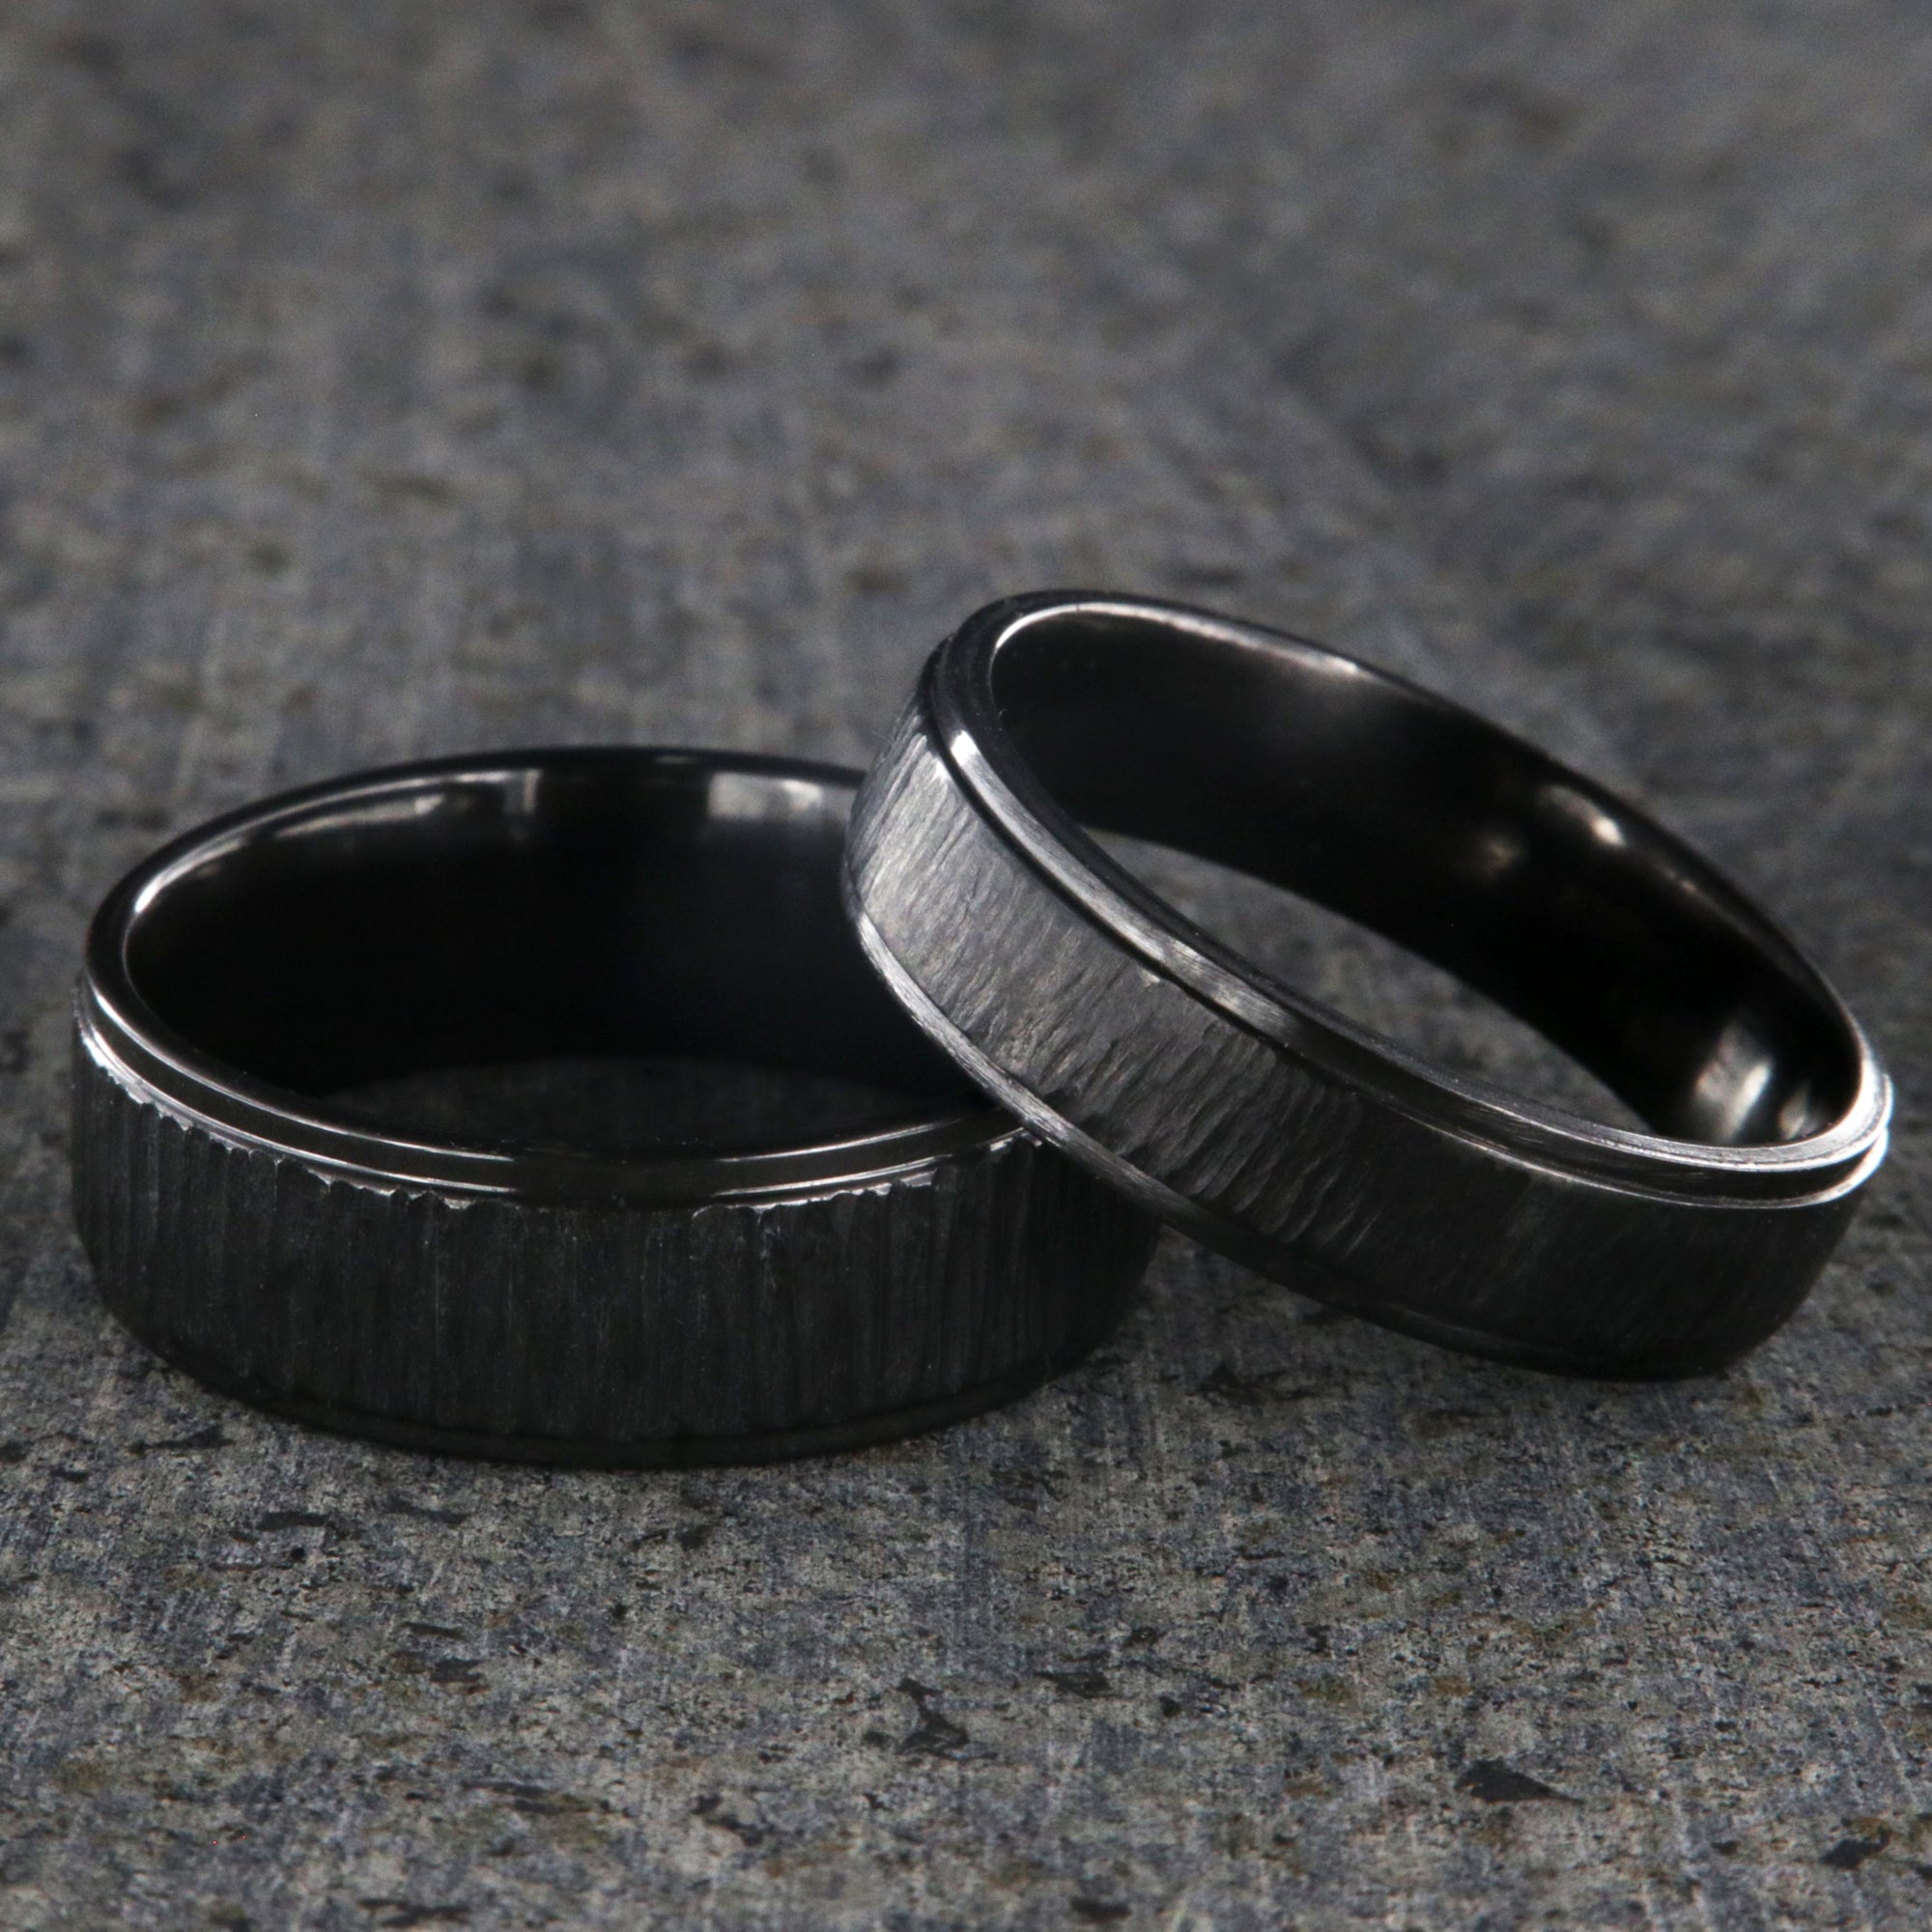 8mm and 6mm wide matching black zirconium wedding ring set with a raised center and tree bark finish